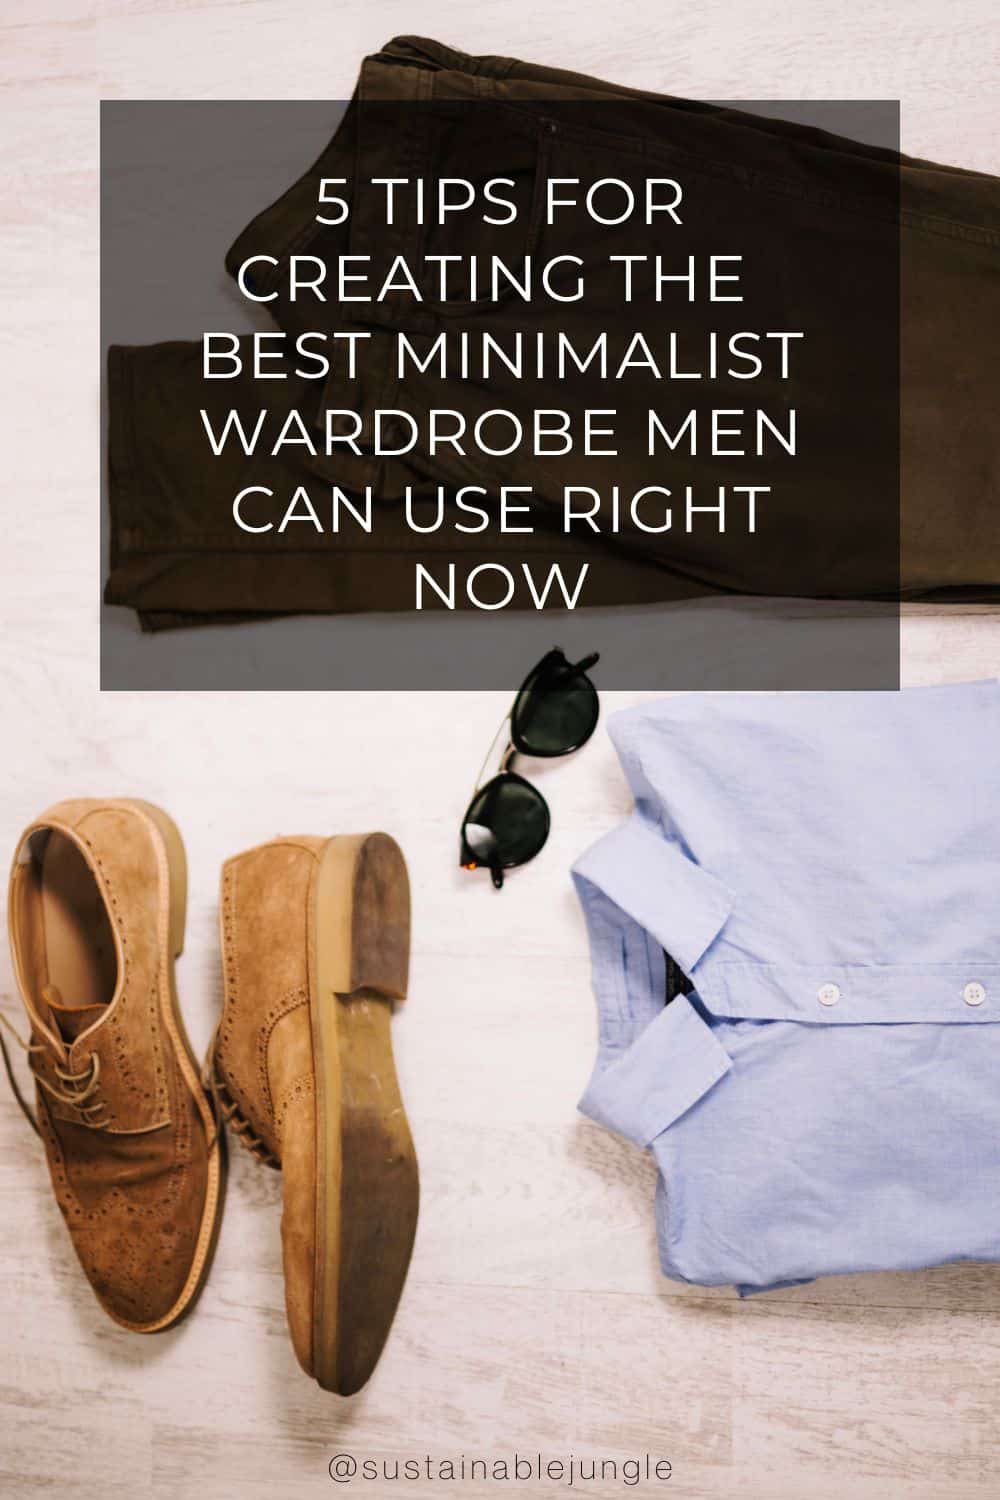 5 Tips For Creating The Best Minimalist Wardrobe Men Can Use Right Now Image by alberto dima's images #minimalistwardrobemen #minimalistmenswardrobe #mensminimalistwardrobe #menscapsulewardrobe #minimalistcapsulewardrobeformen #minimalstmensessentials #sustainablejungle